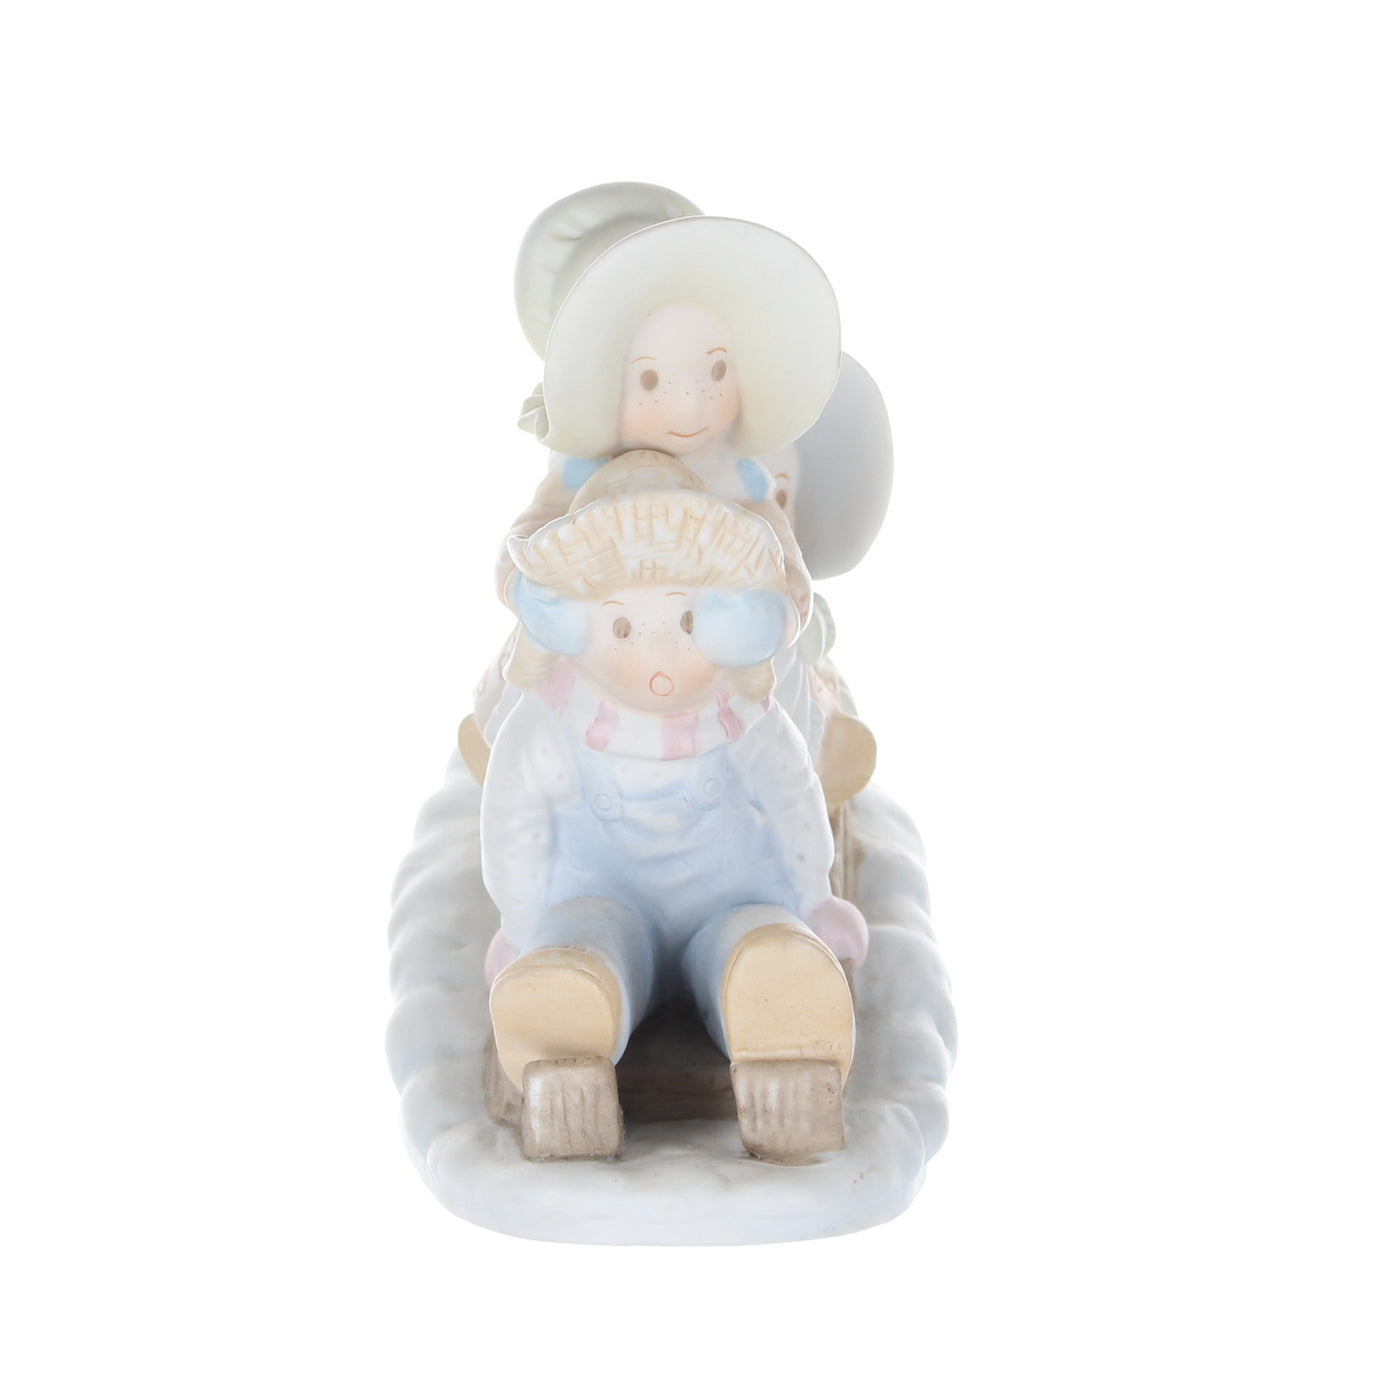 Homco-Circle-of-Friends-Porcelain-Figurine-A-Sledding-We-Will-Go-picture-7